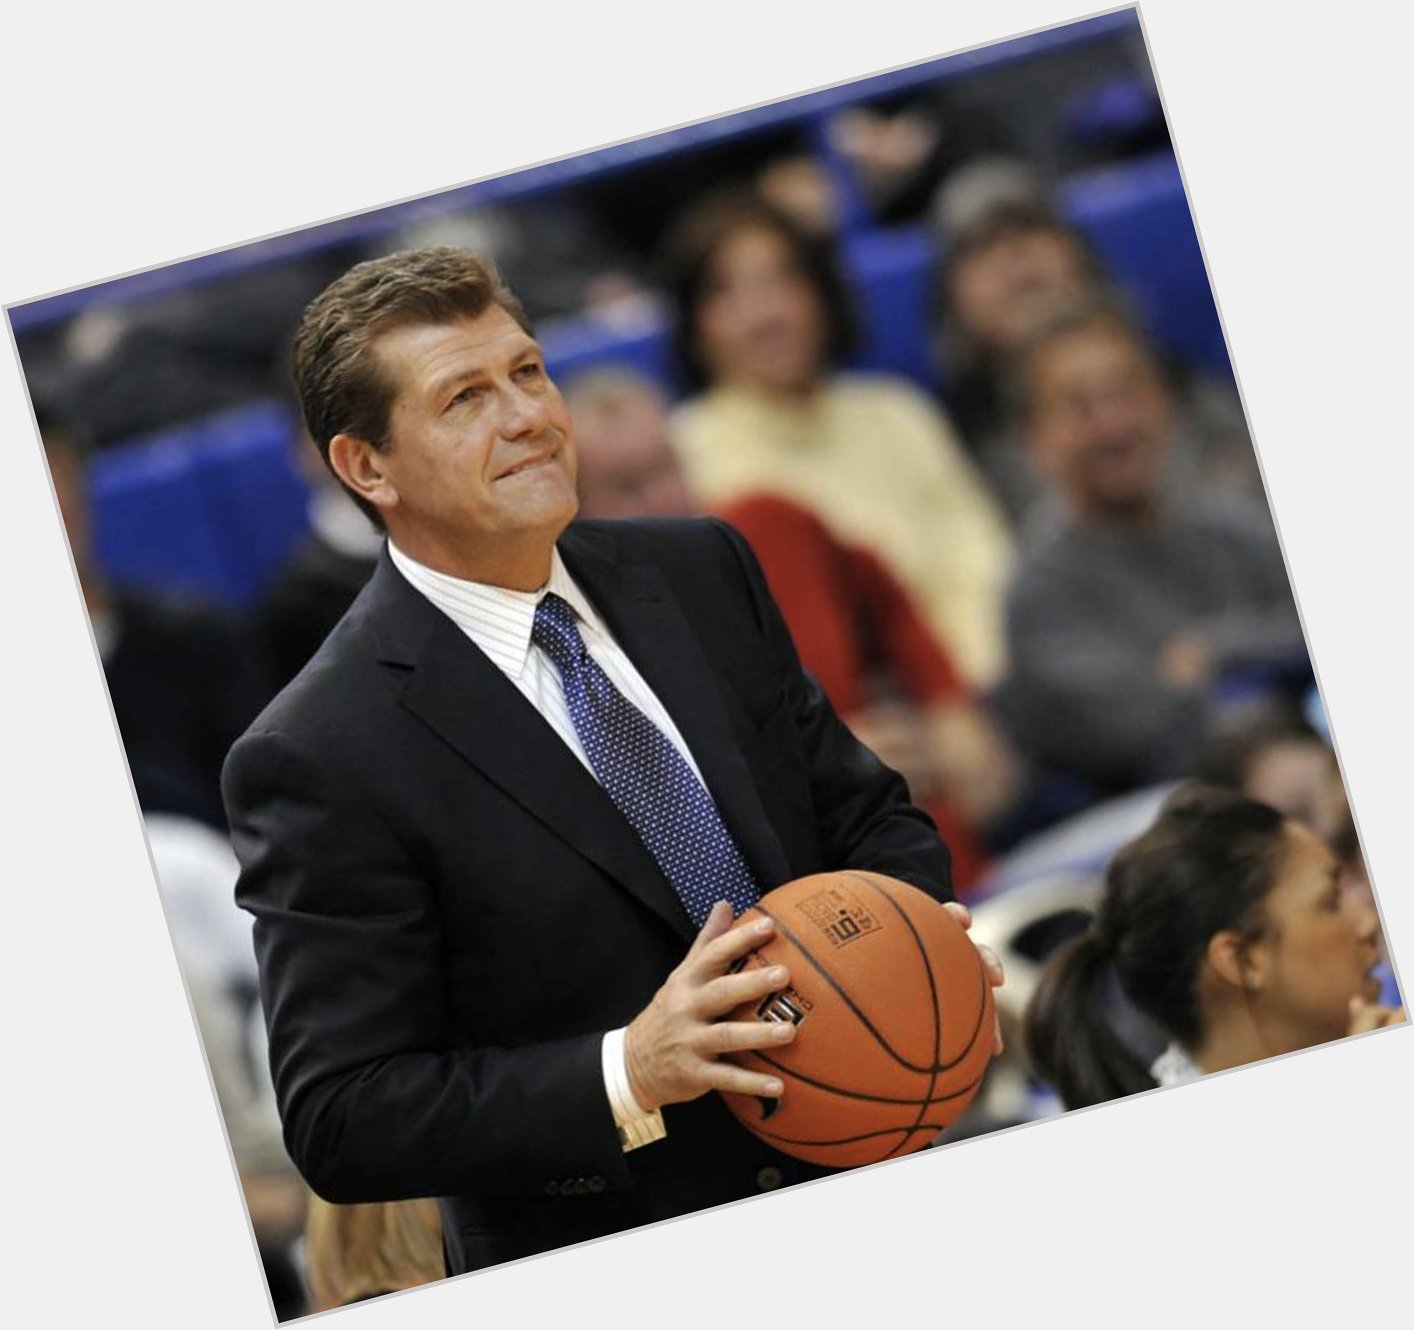 Happy birthday to Geno Auriemma! Here is a current photo of him. 